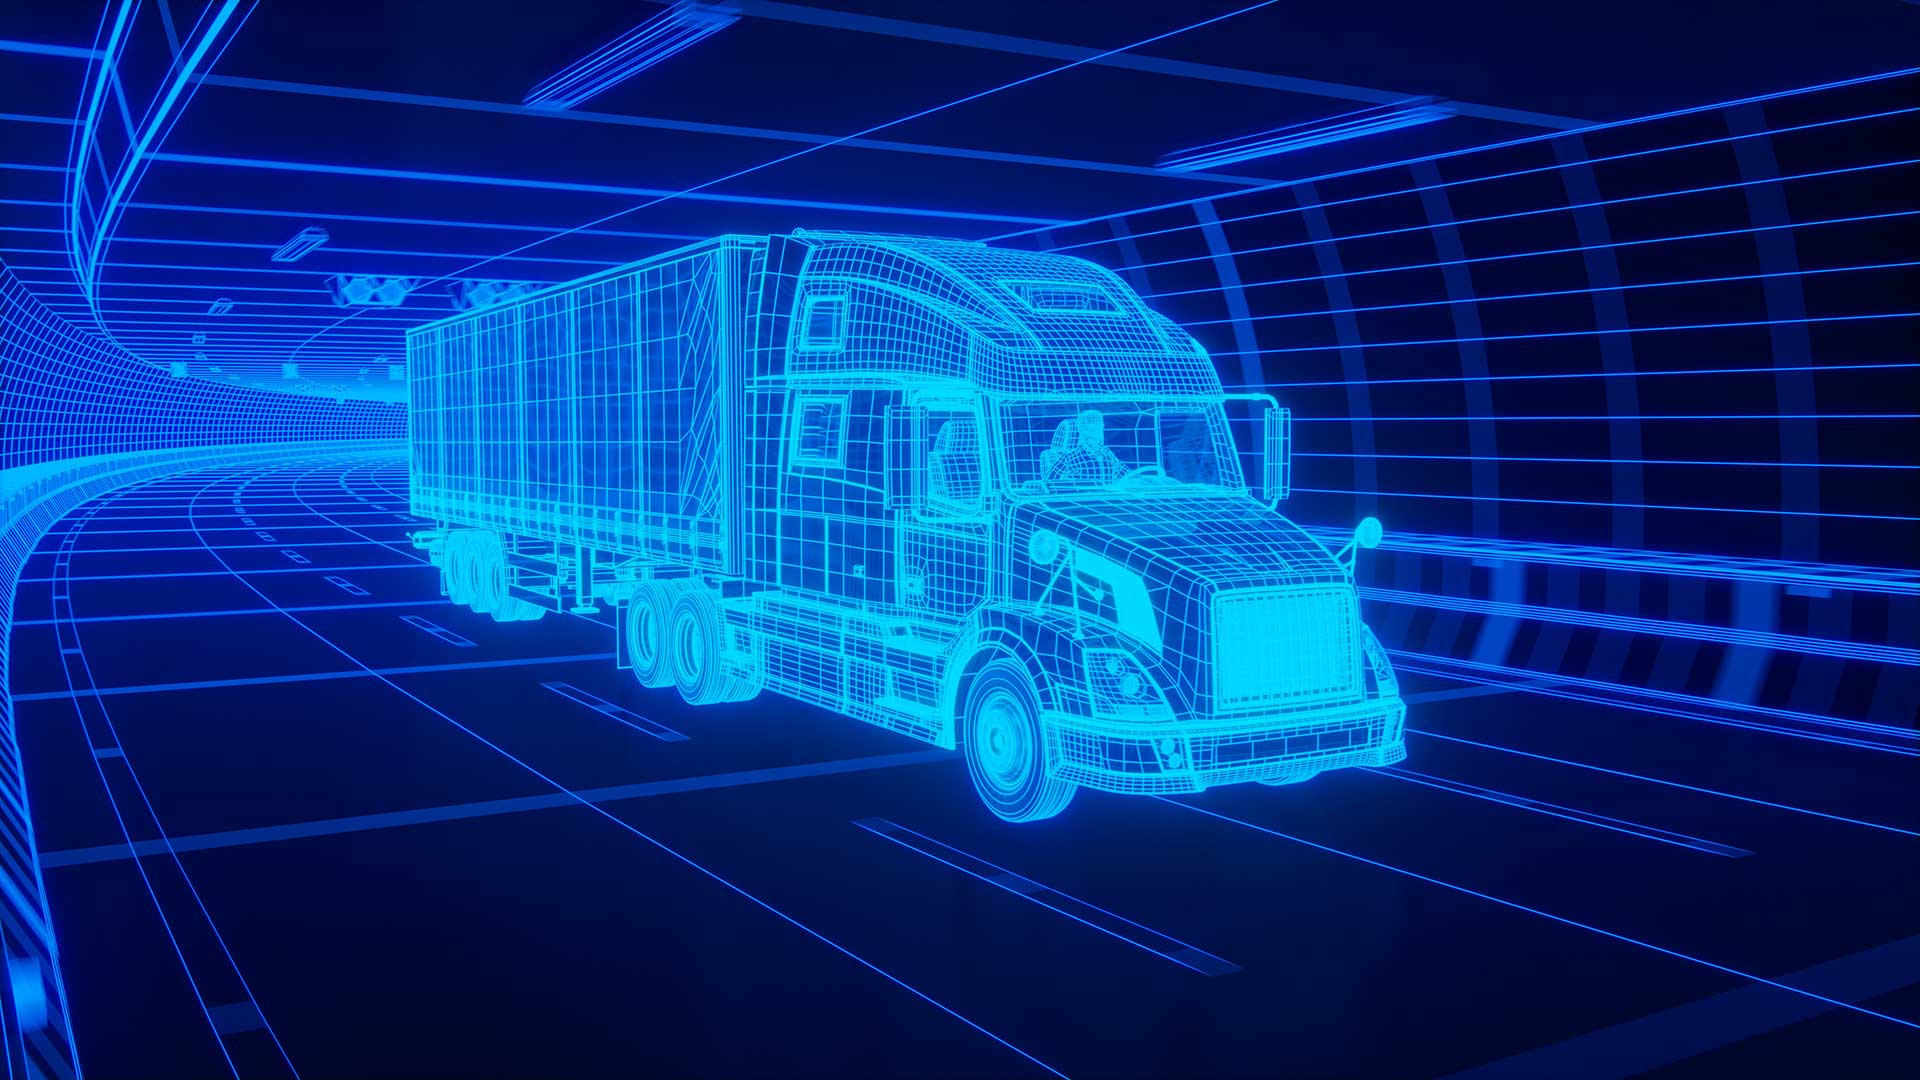 The truck business: Truck Industry Tech for Safer Roads